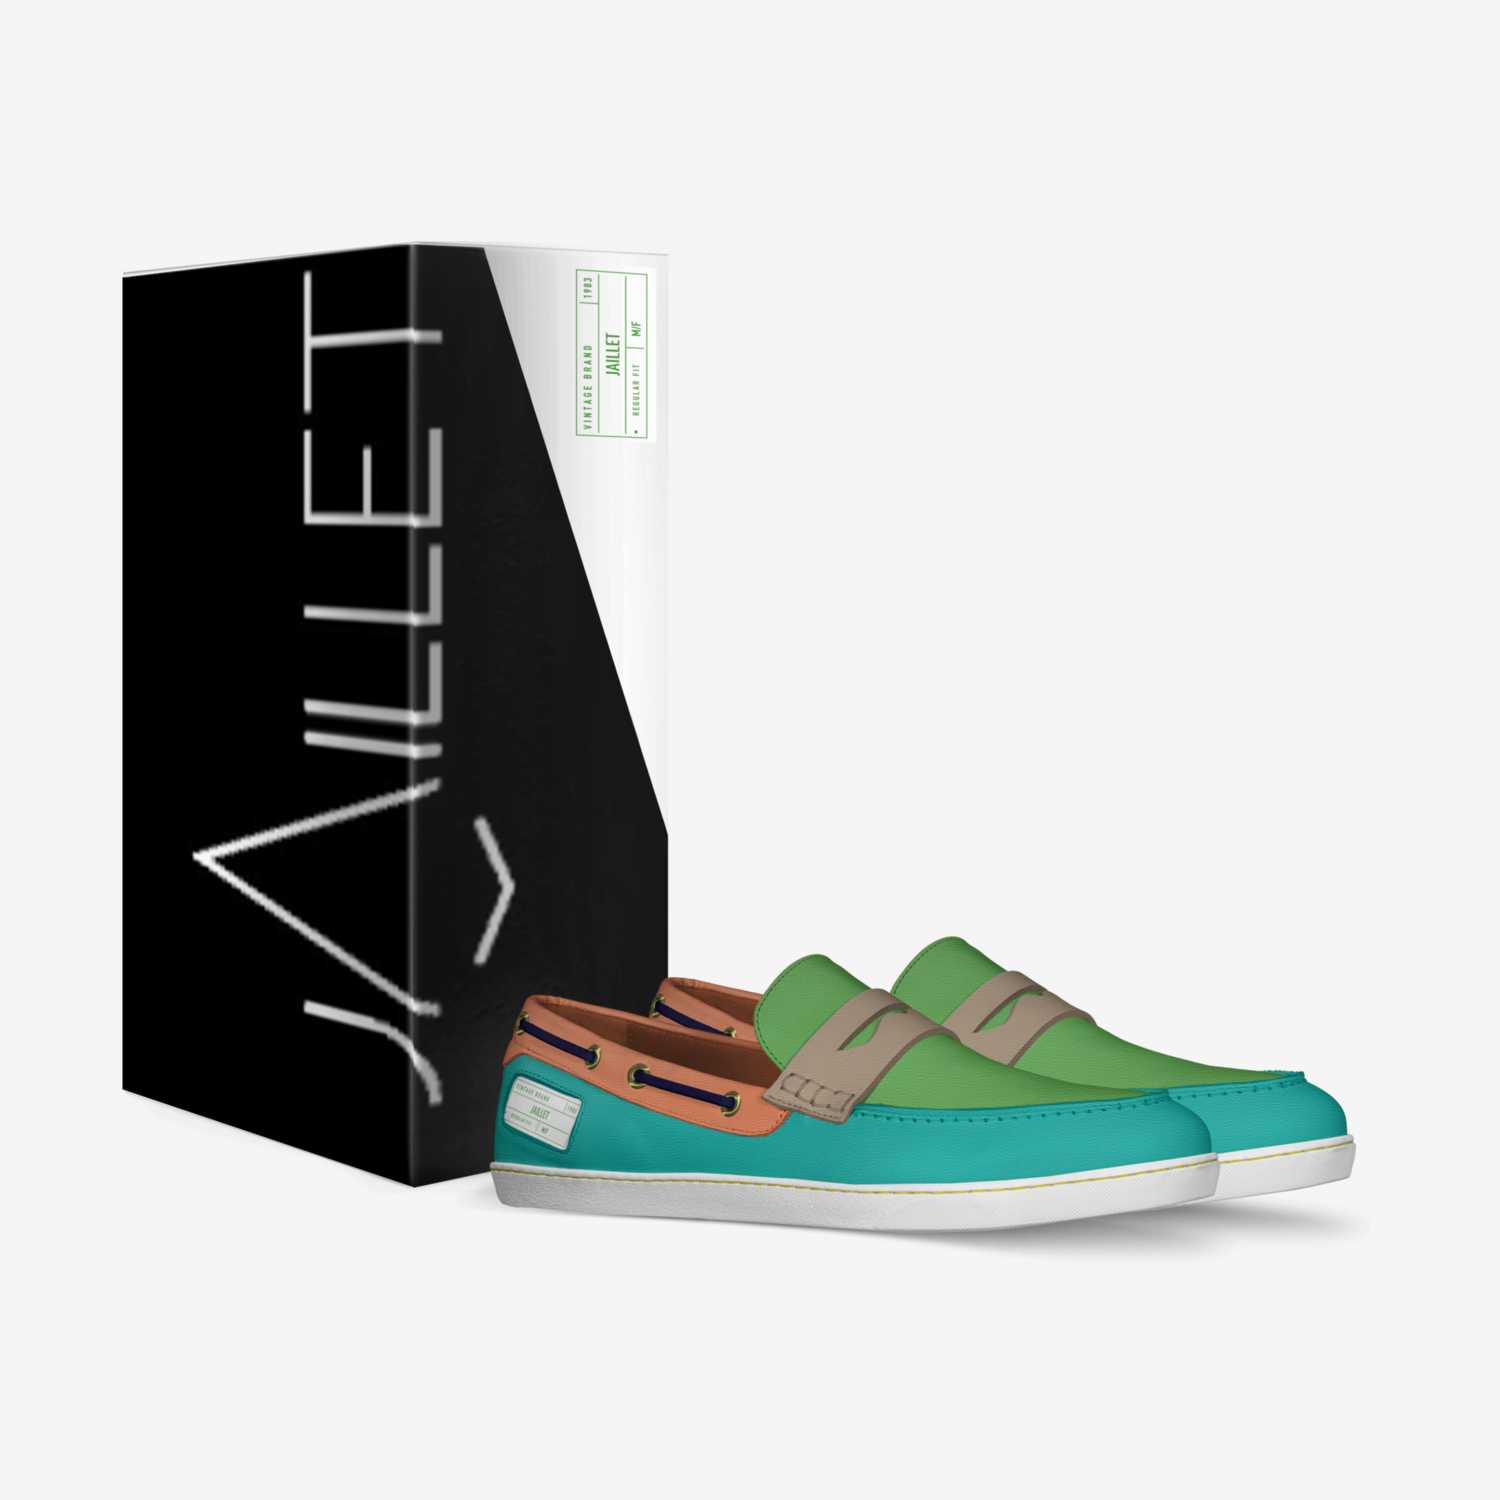 JAILLET custom made in Italy shoes by Dabzilla Flossup | Box view